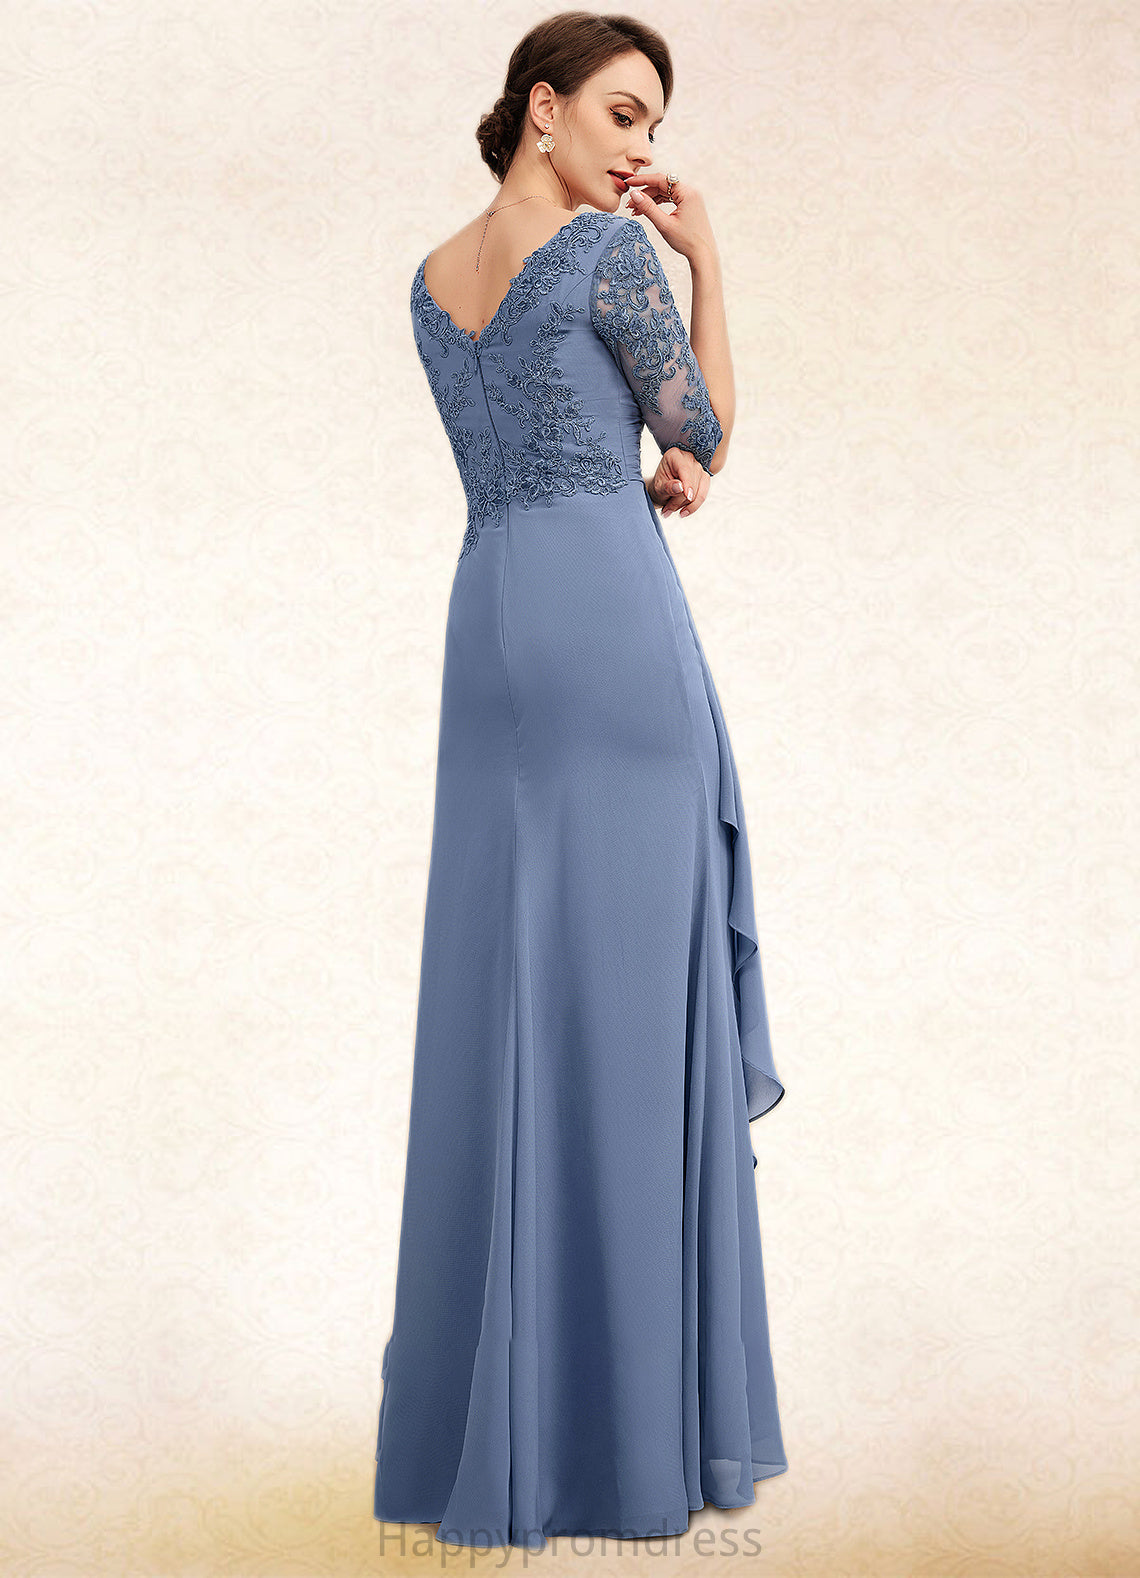 Aaliyah A-Line V-neck Floor-Length Chiffon Lace Mother of the Bride Dress With Cascading Ruffles XXS126P0014609